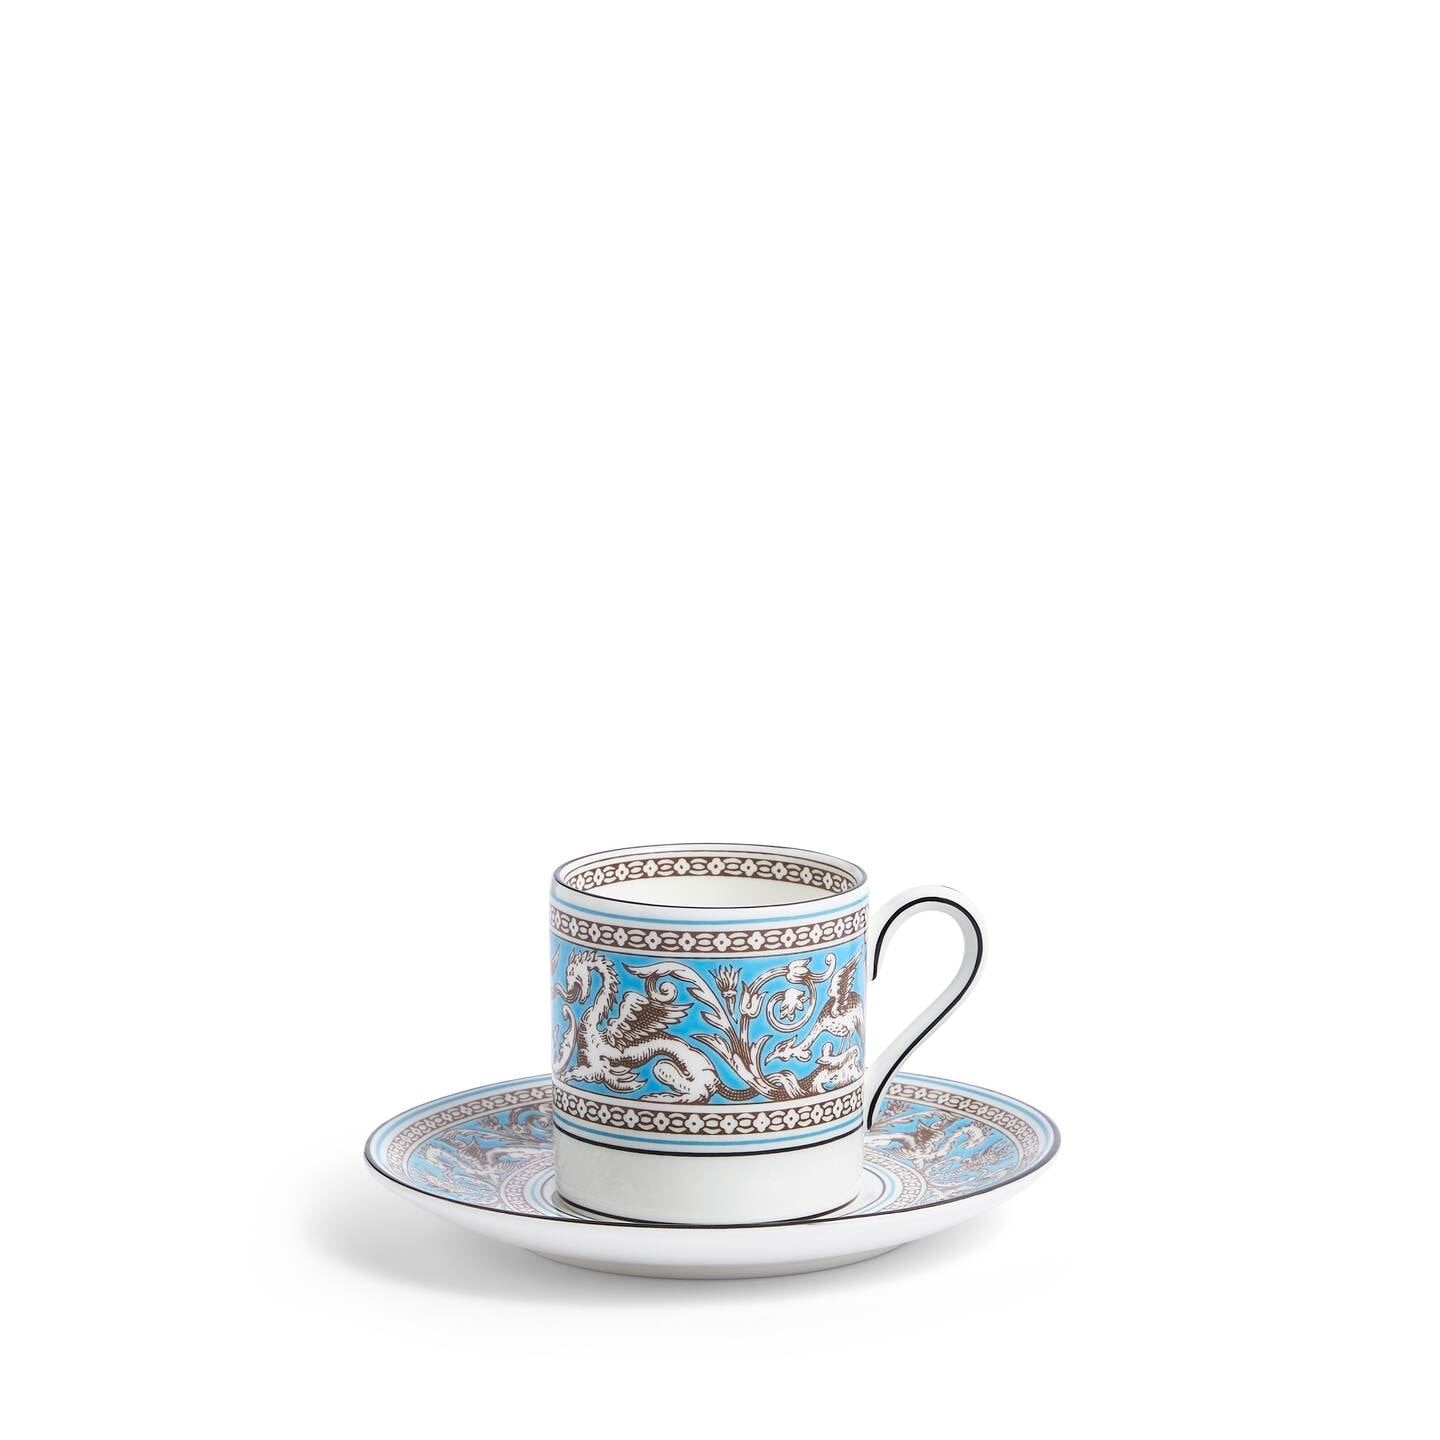 Florentine Turquoise Coffee Cup and Saucer | Wedgwood